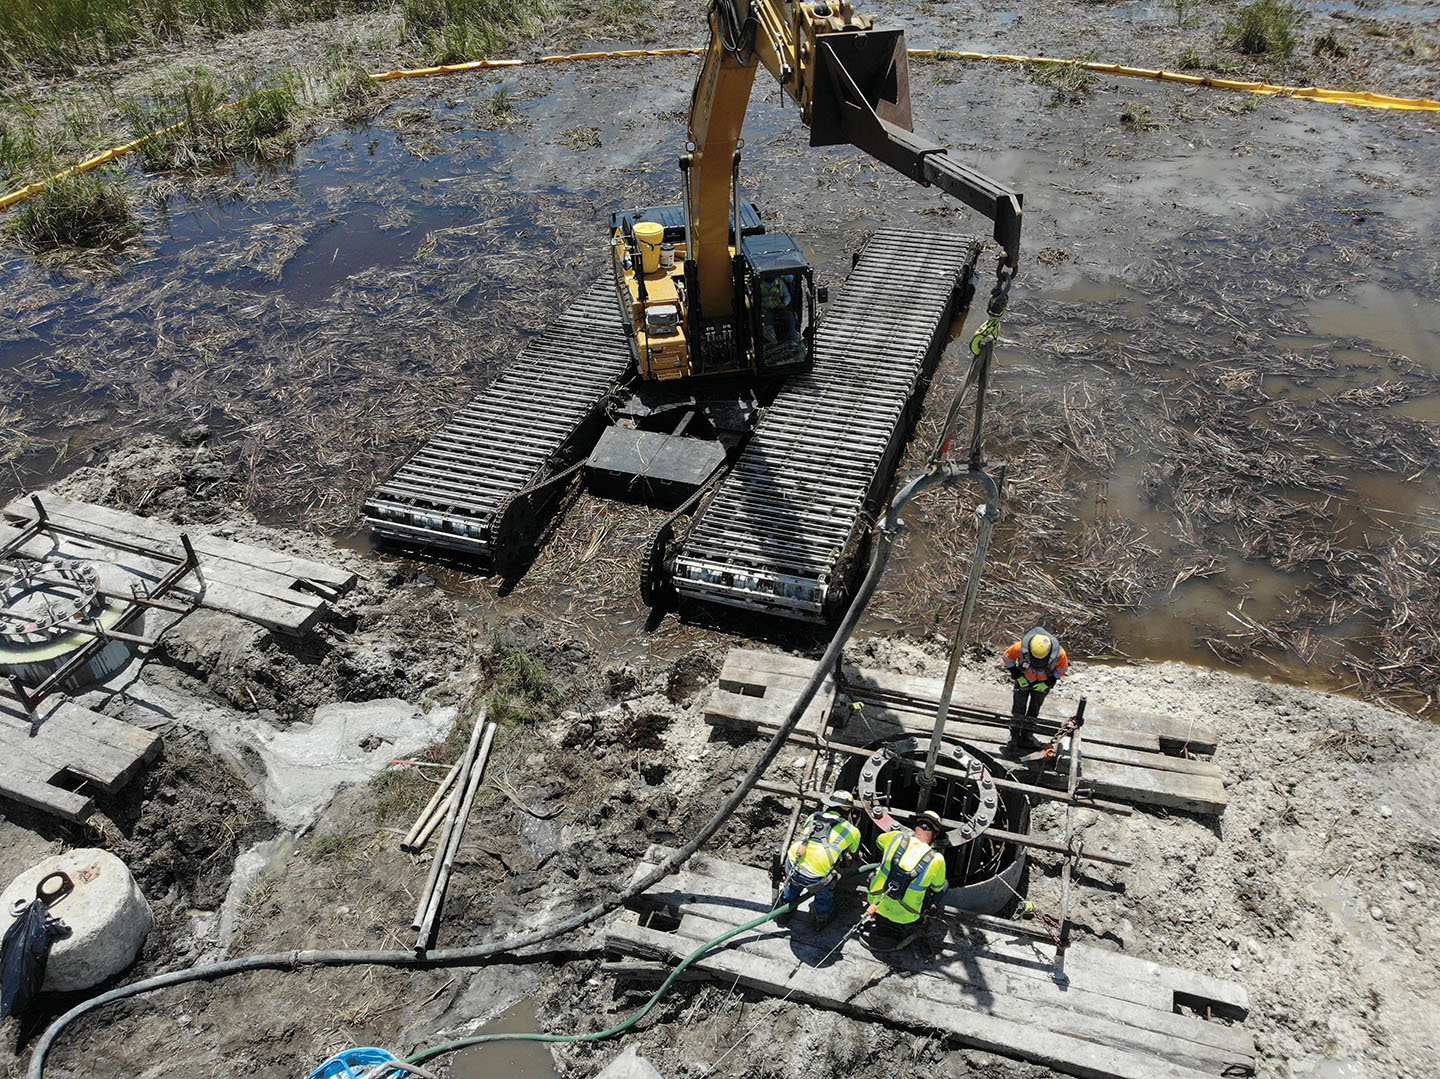 Workers on concrete platforms next to a CAT crane in muddy water. Image by Aldridge Electric.